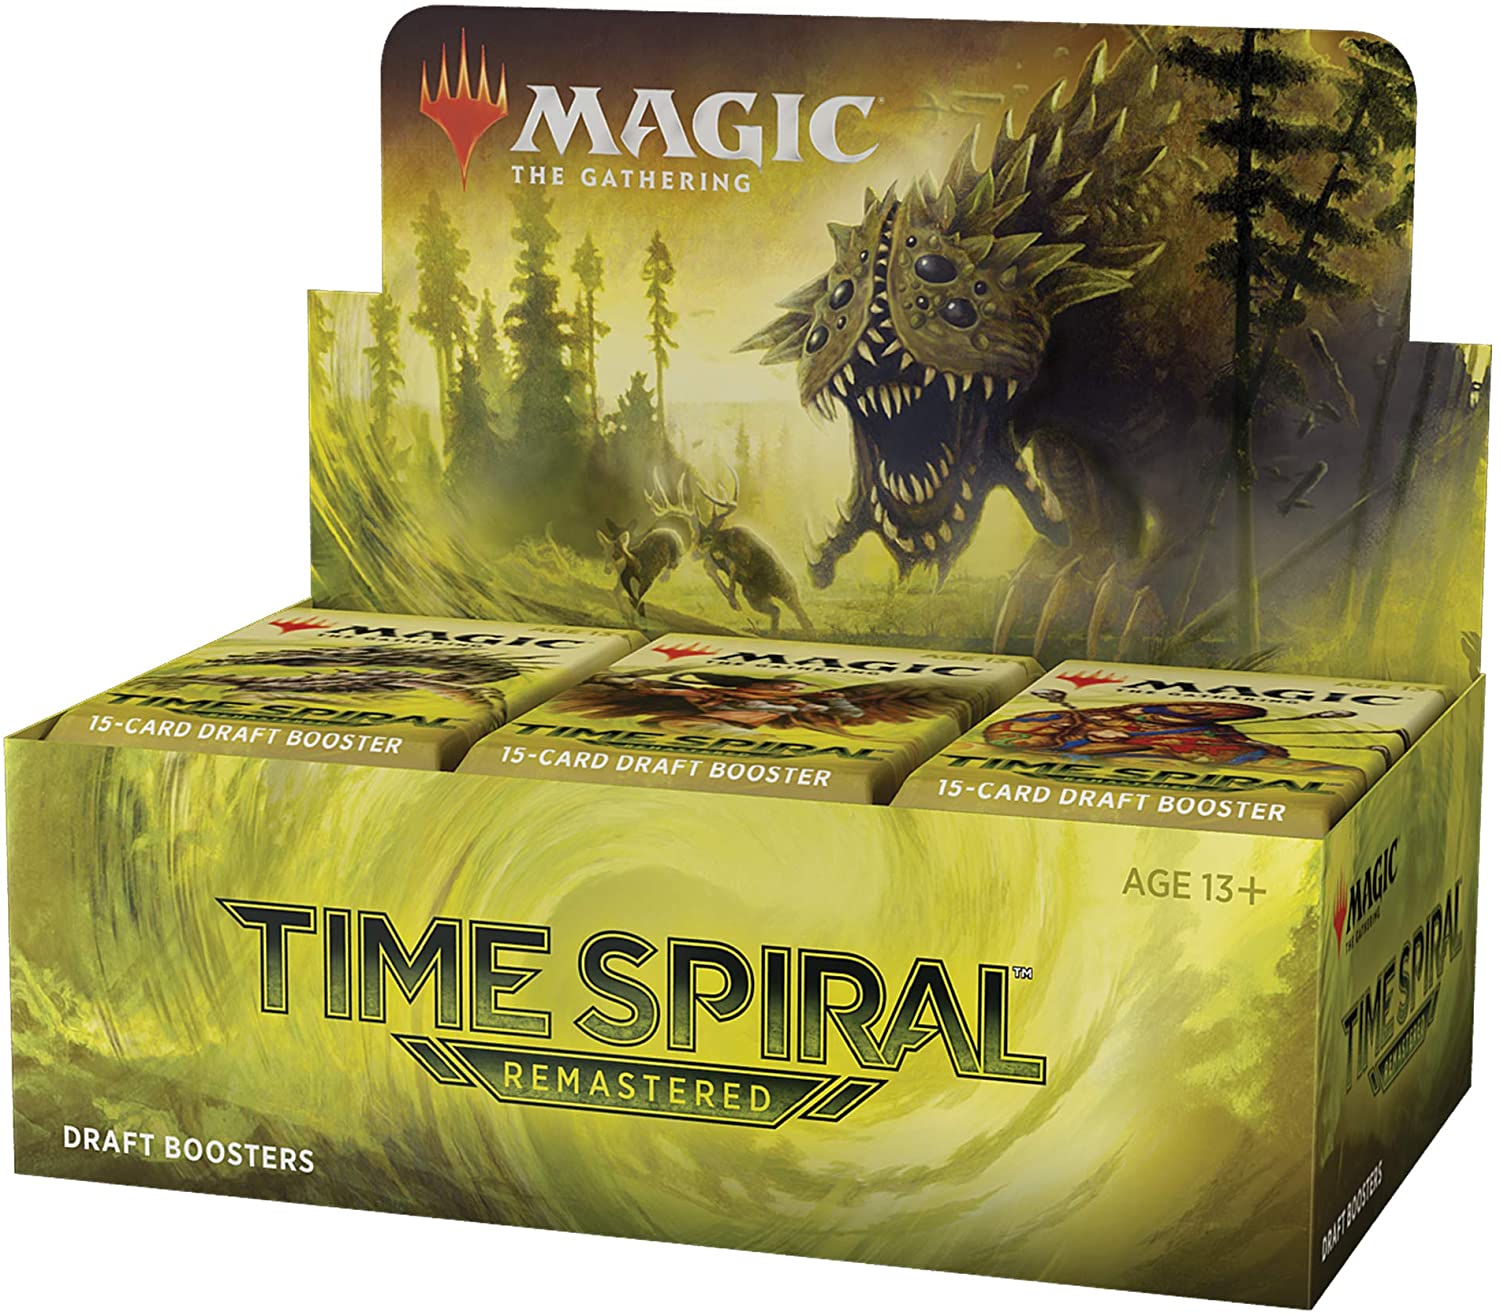 Time Spiral Remastered Draft Booster Box | Gamer Loot